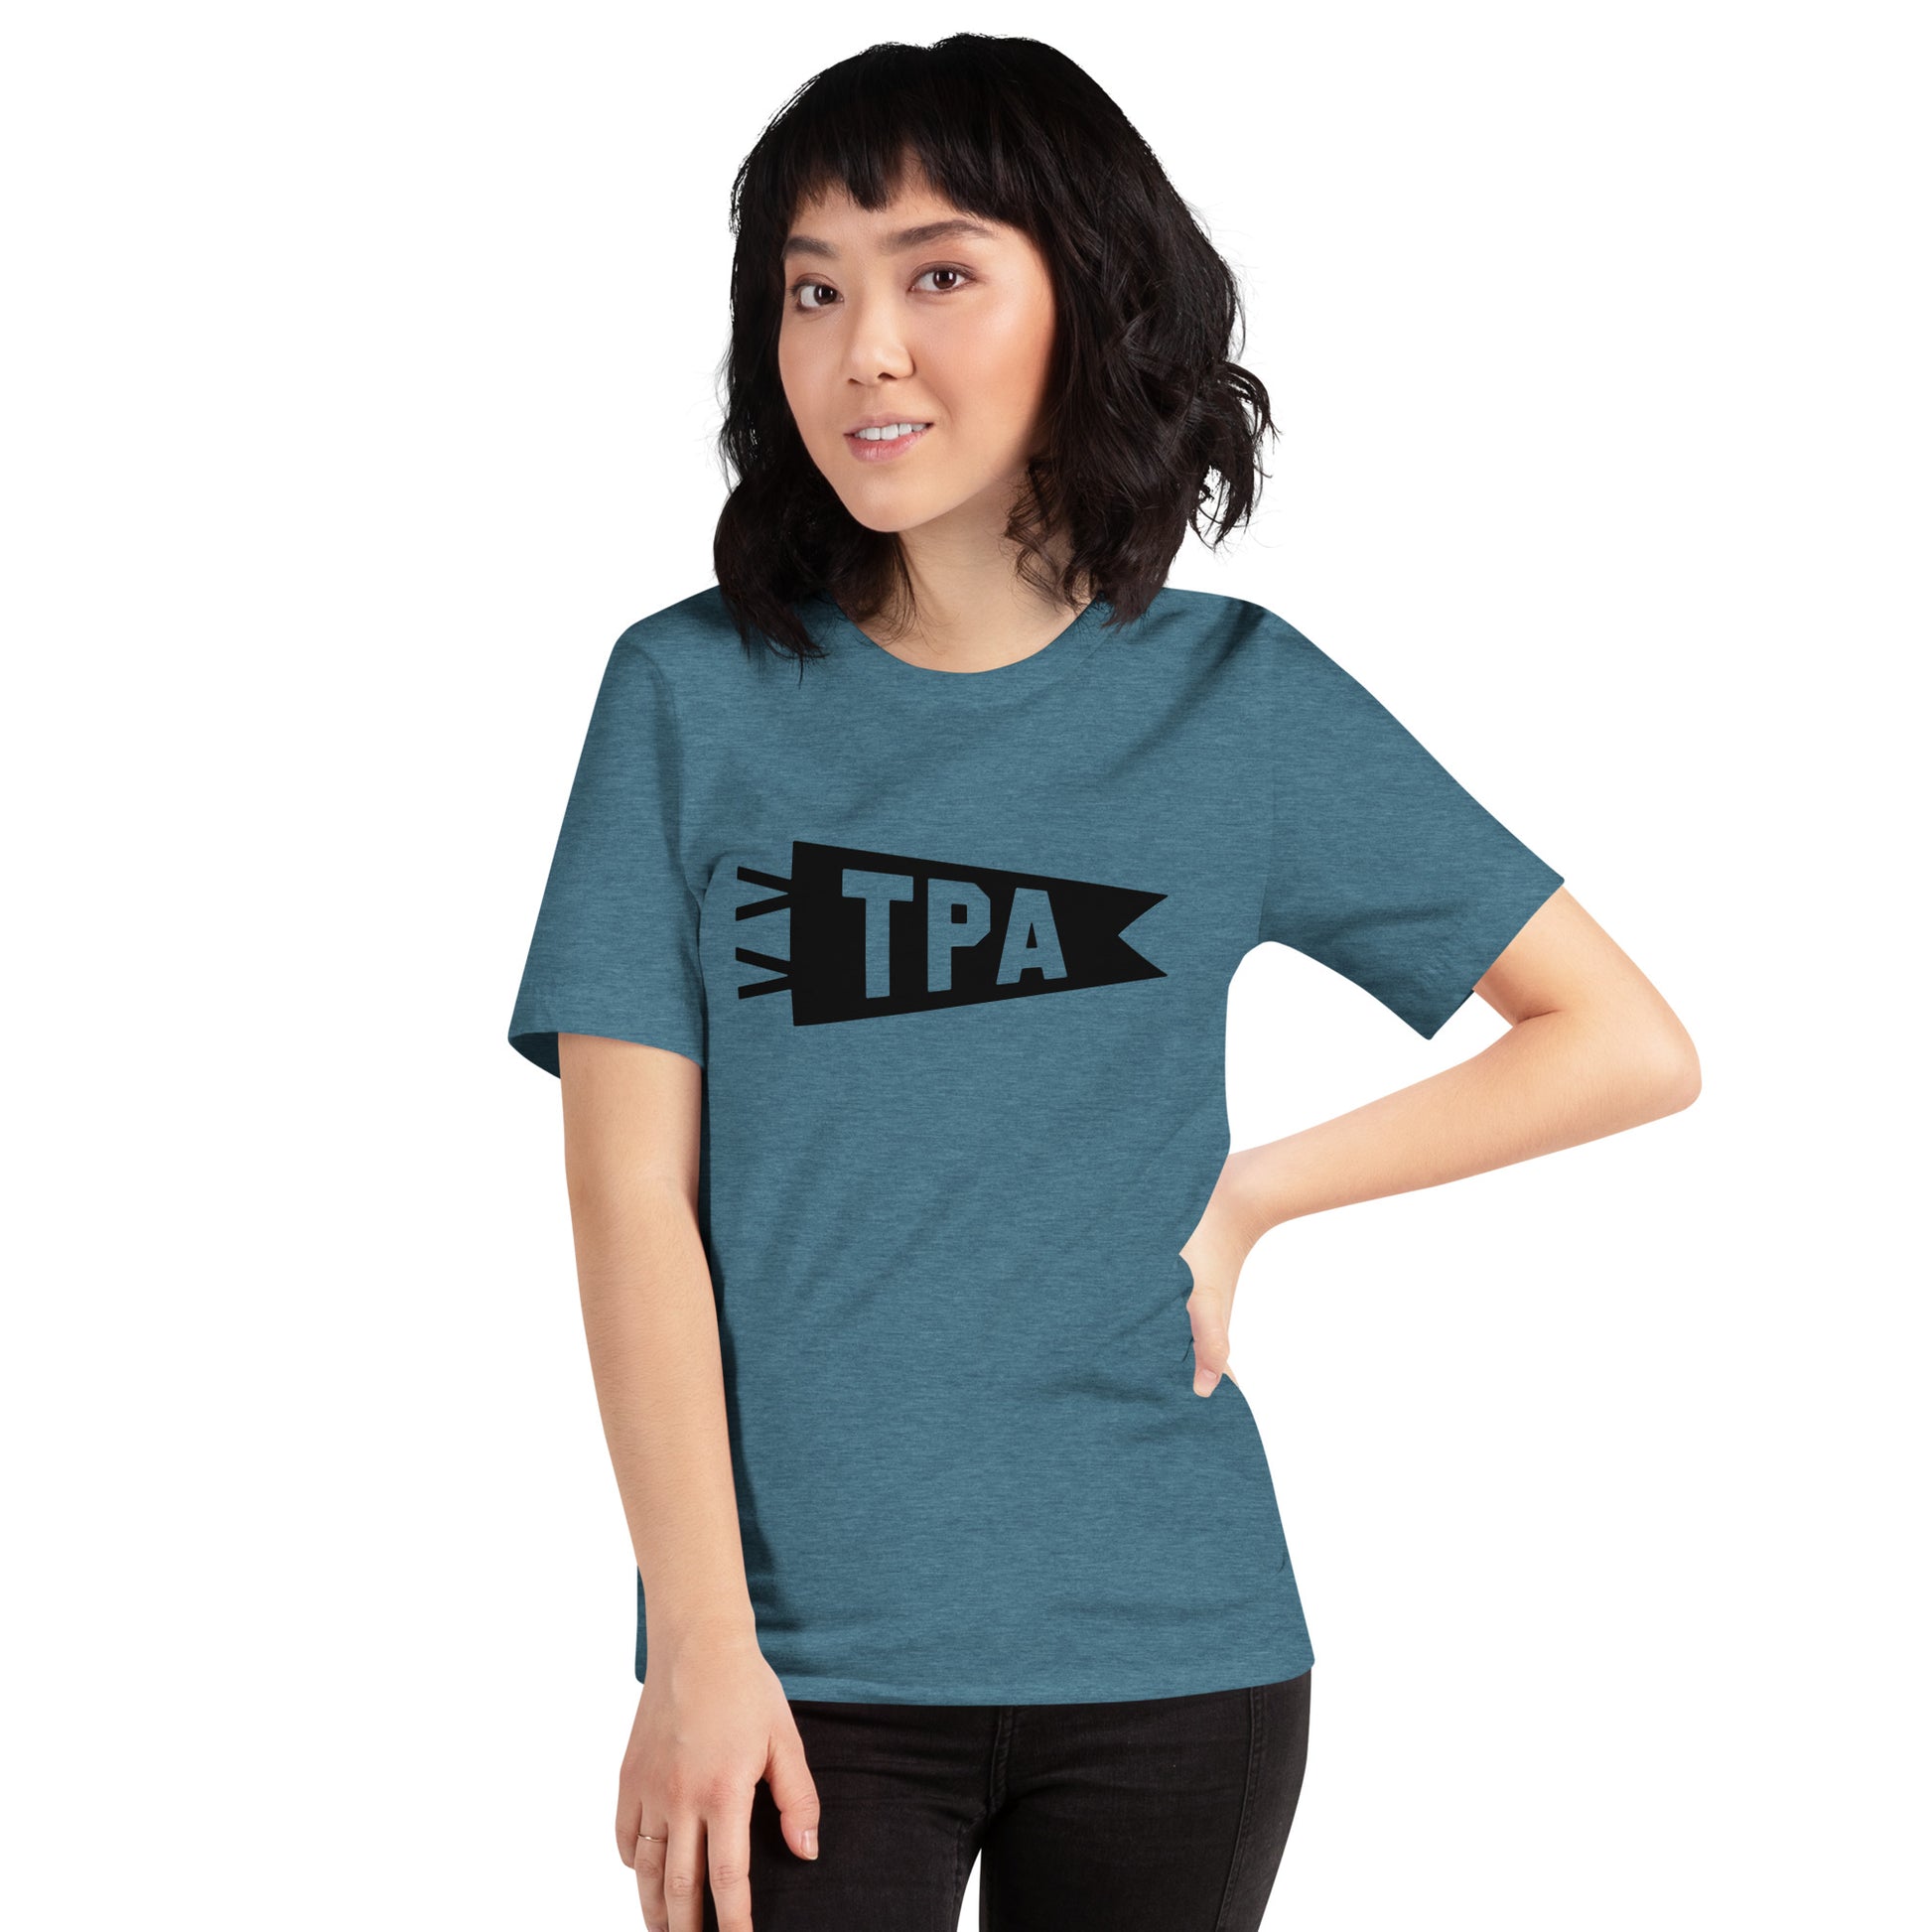 Airport Code T-Shirt - Black Graphic • TPA Tampa • YHM Designs - Image 05